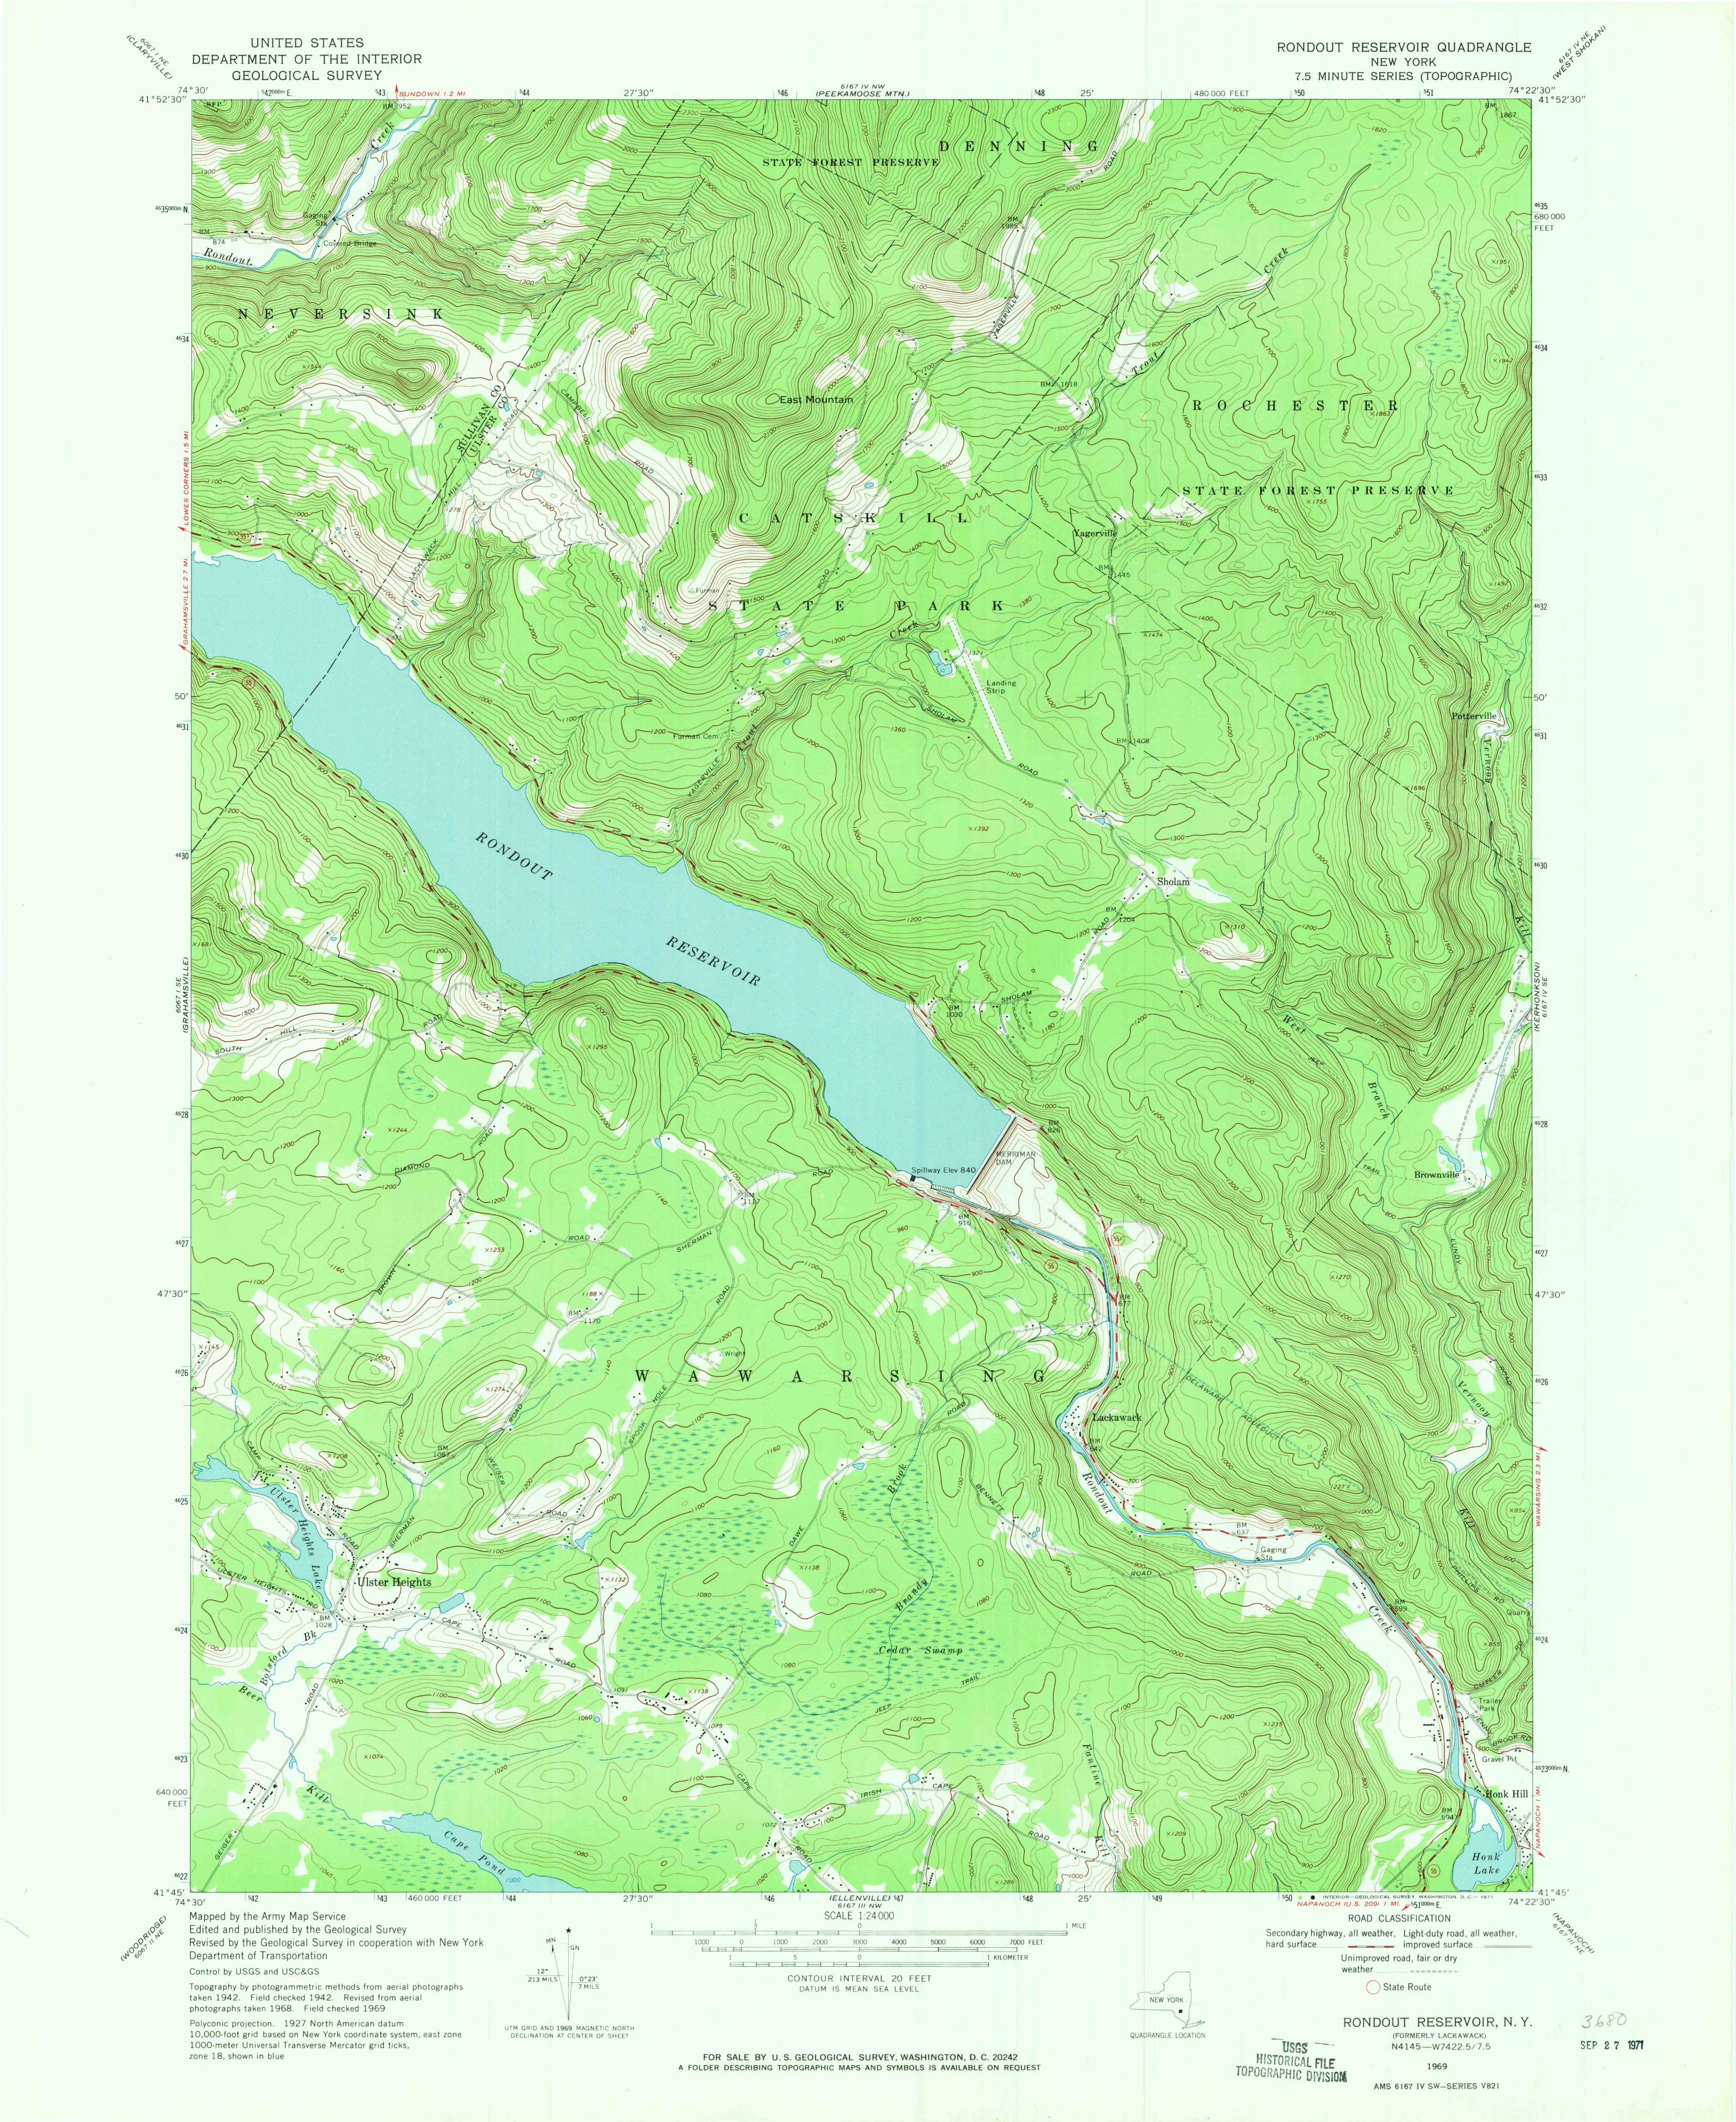 1969 USGS topographical map of Rondout-Reservoir